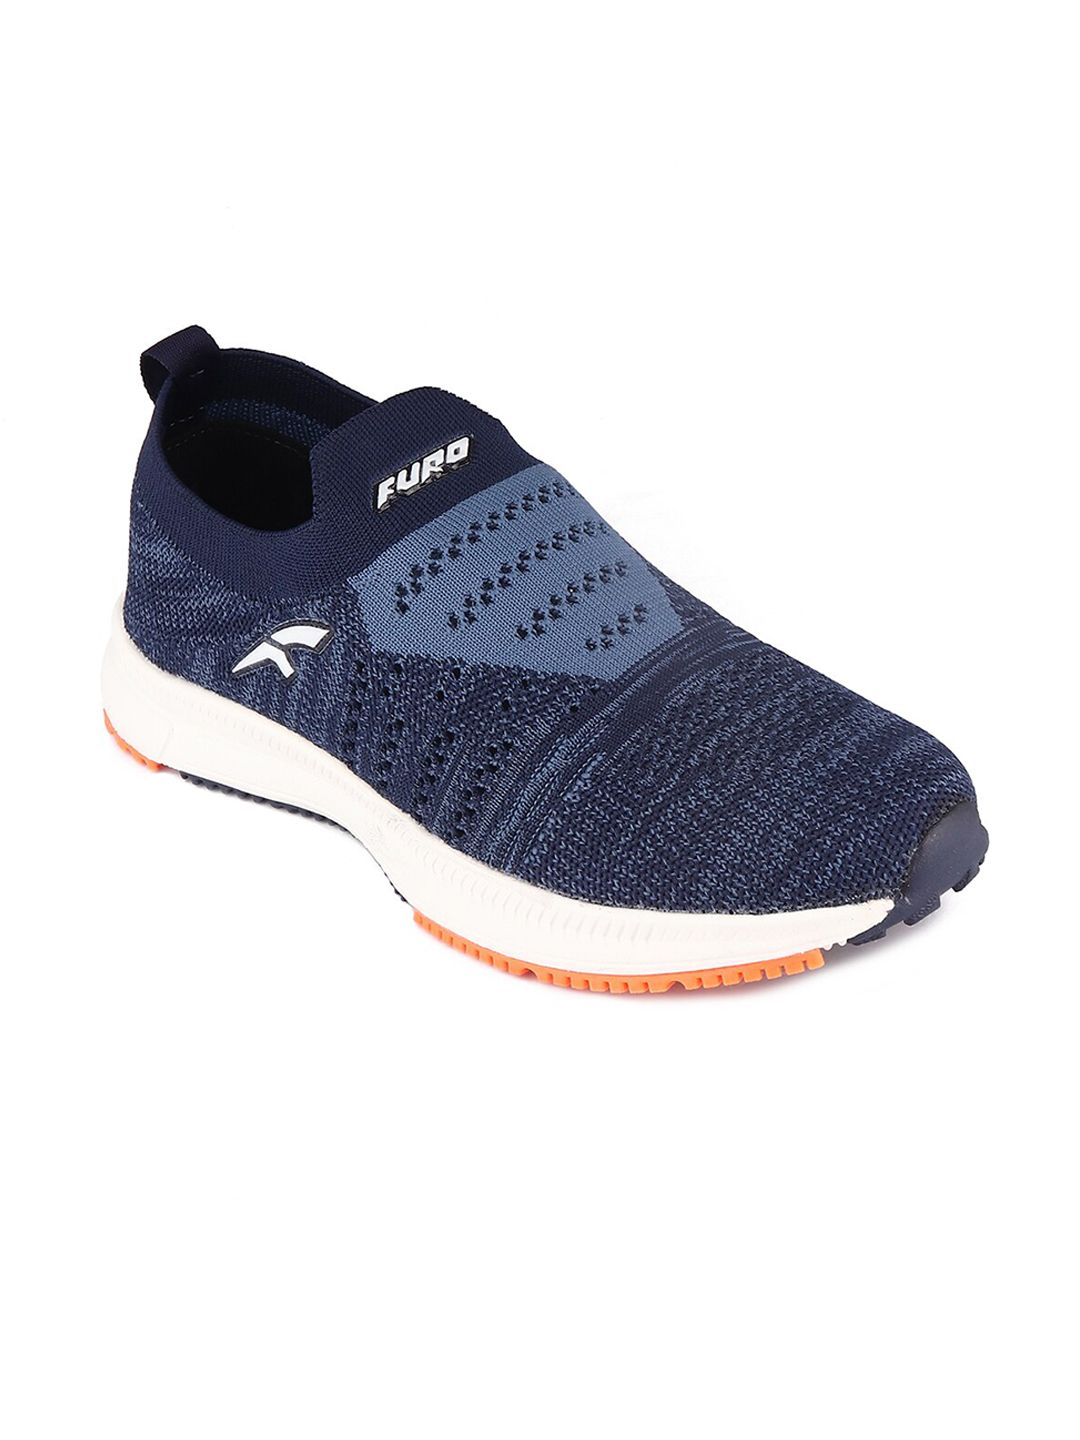 FURO by Red Chief Women Navy Blue Mesh Walking Shoes Price in India